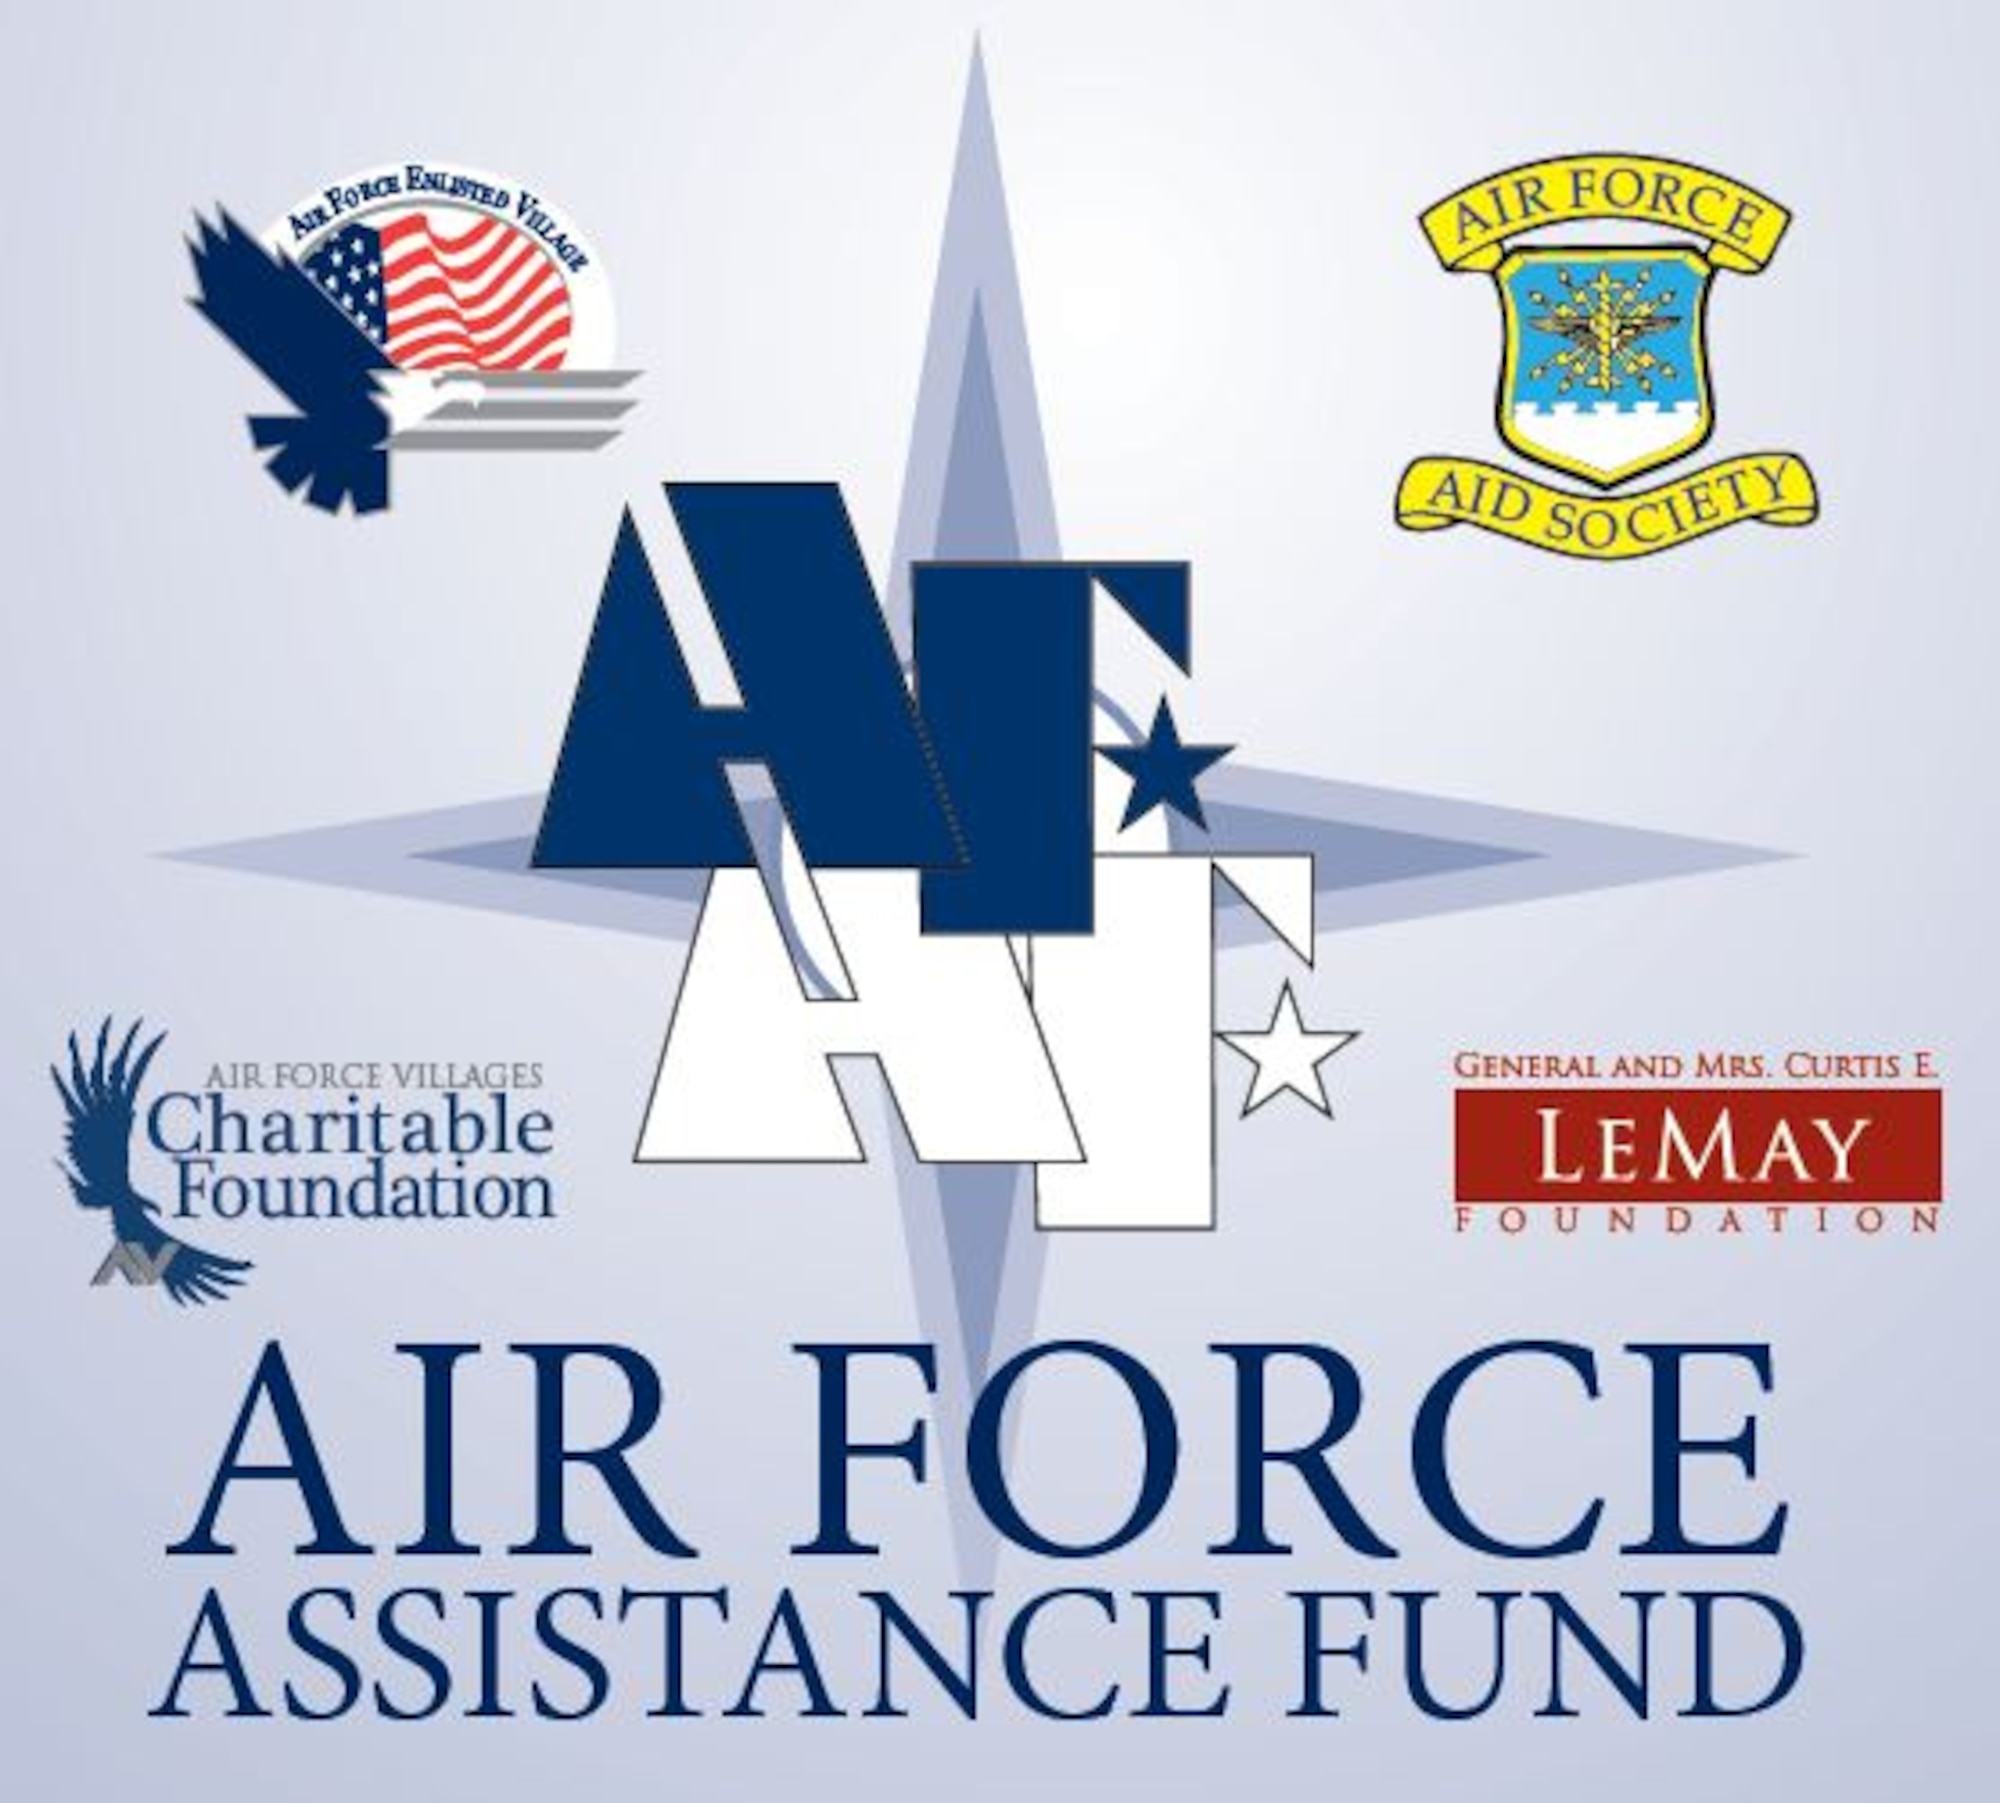 Air Force Assistance Fund Flier